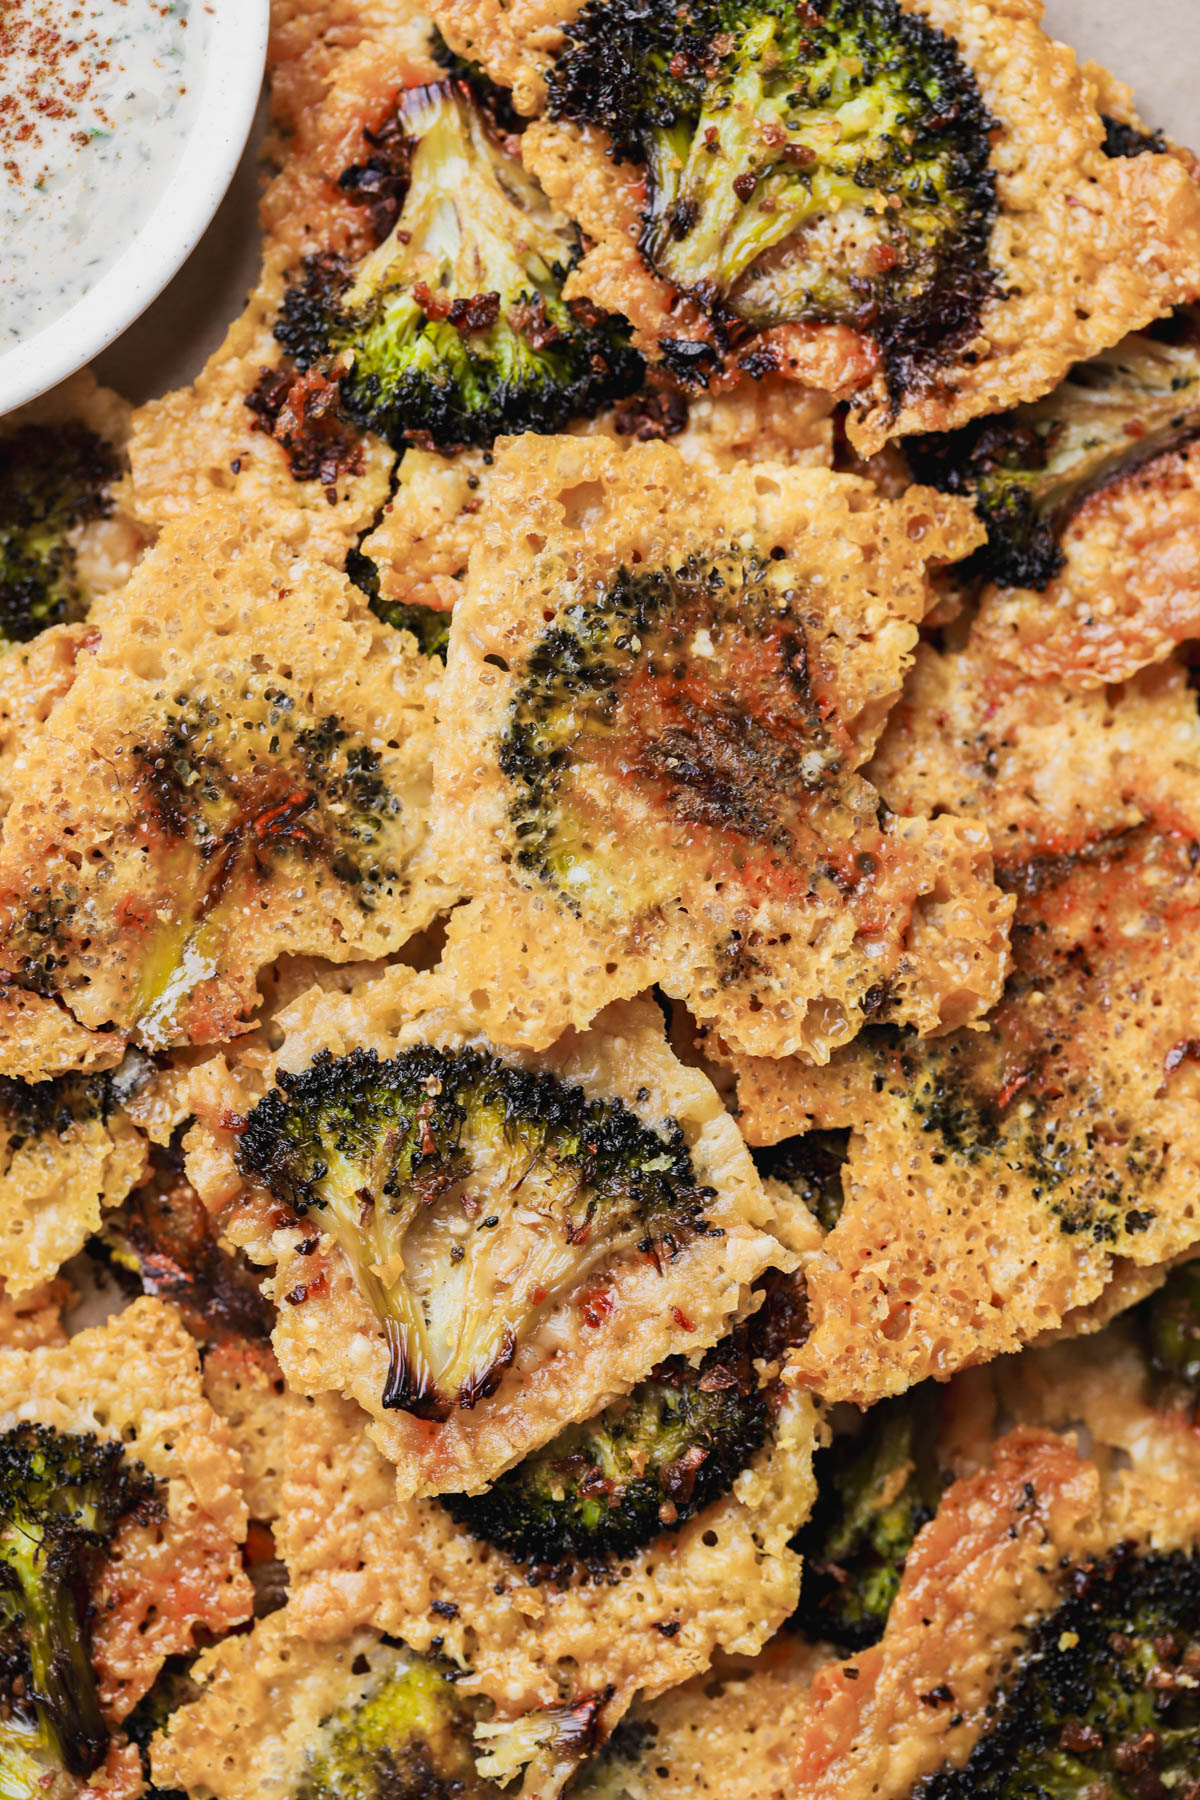 Baked parmesan with broccoli.  